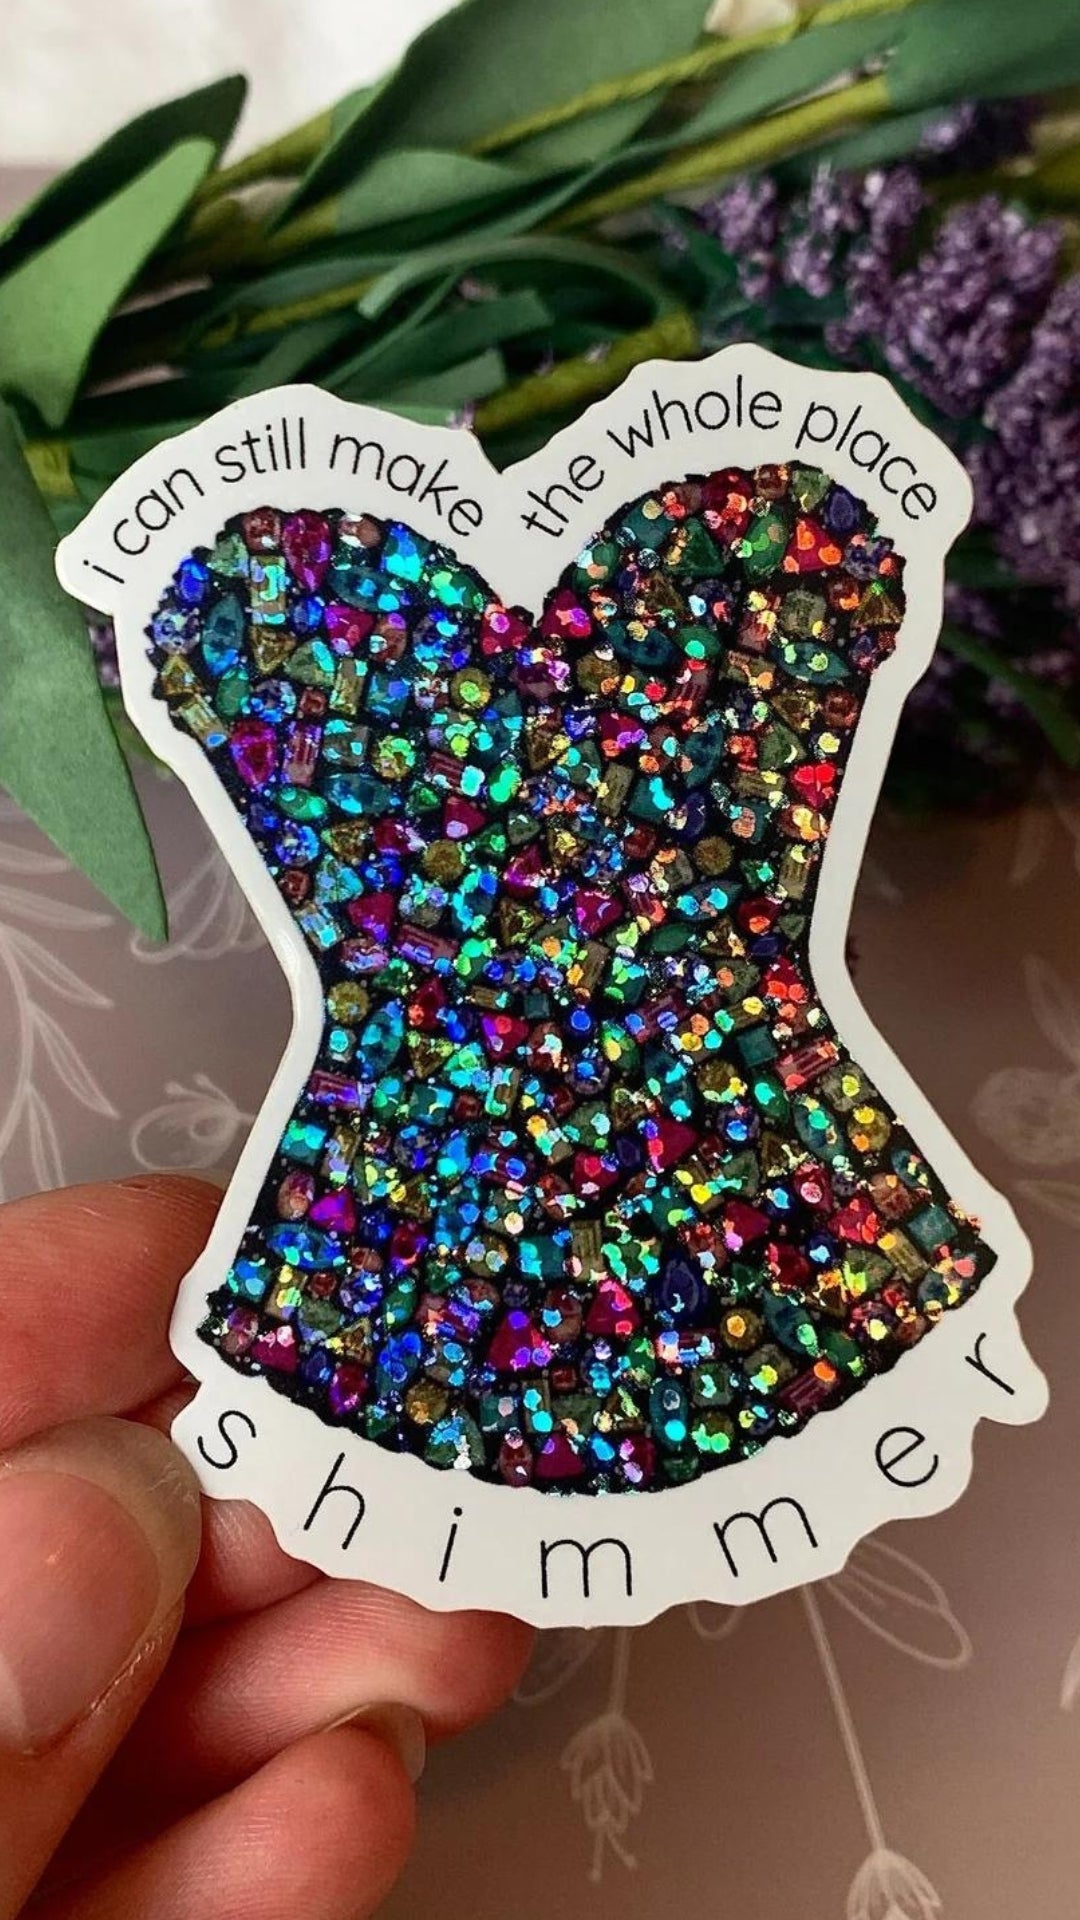 My Favorite Color is Sparkles Glitter Taylor Swift Sticker - Little Color  Company